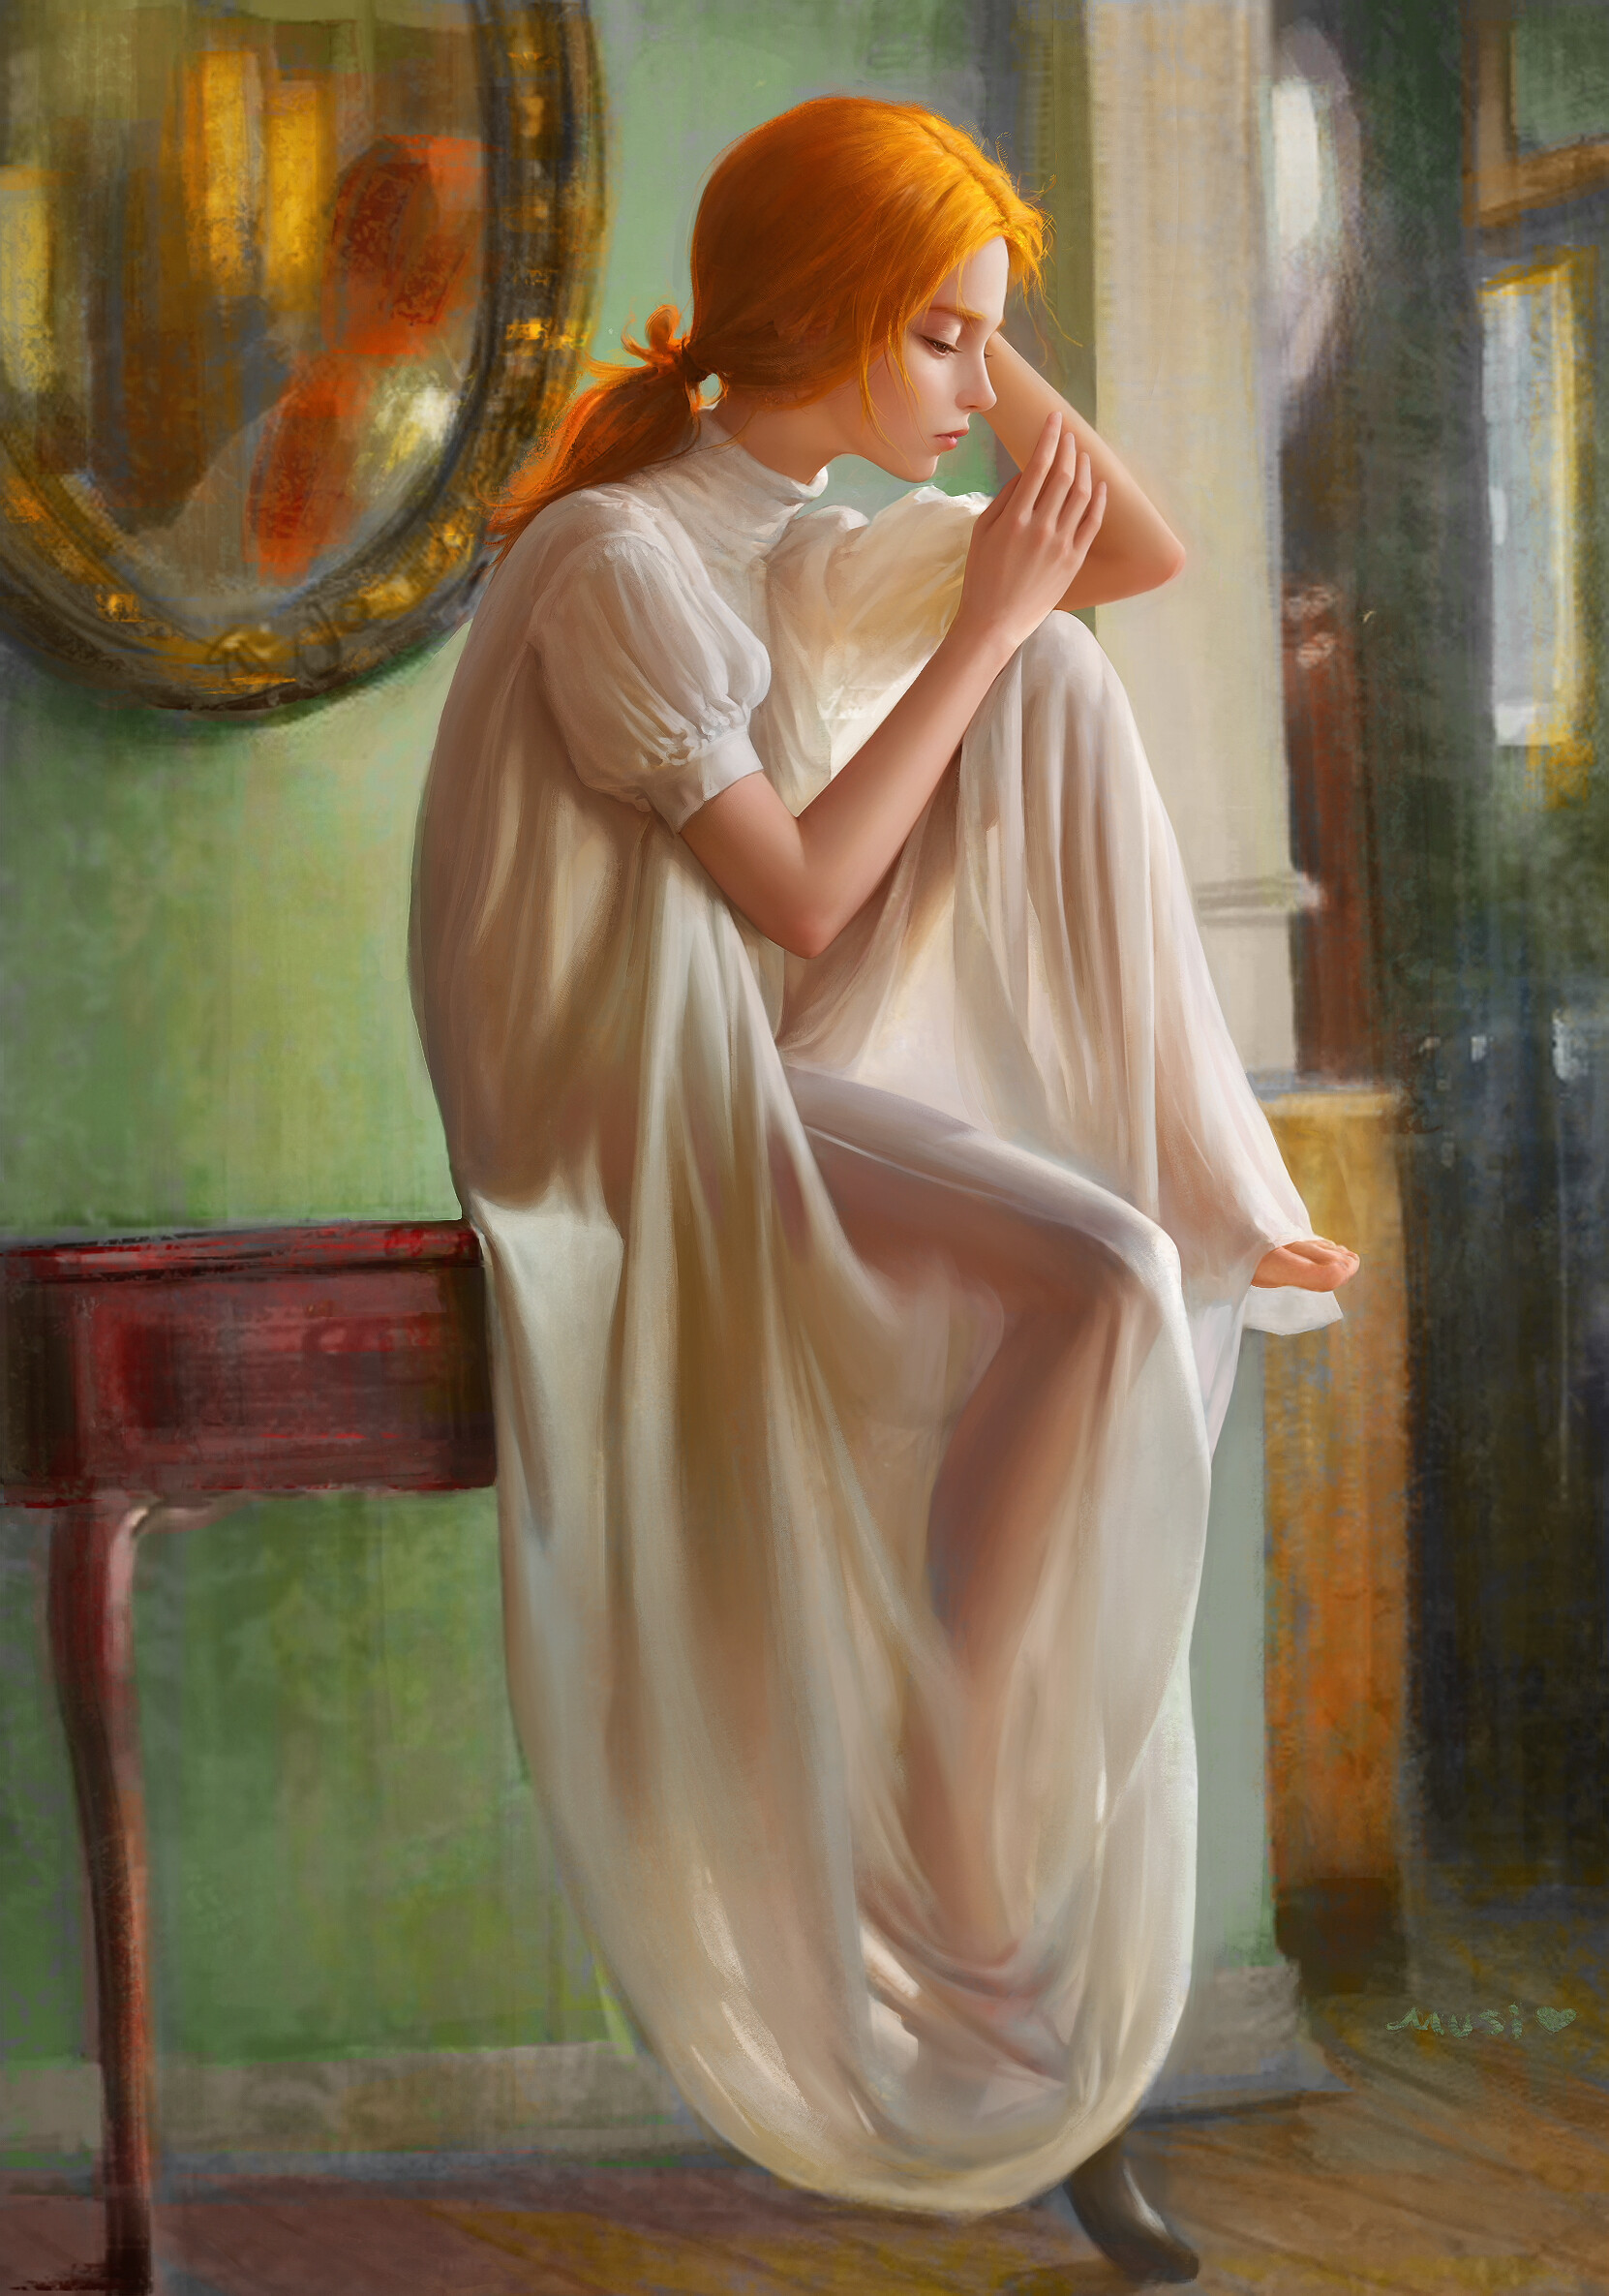 MuSi Drawing Women Redhead Gown Profile Portrait Display Sitting Reflection Mirror 1662x2371